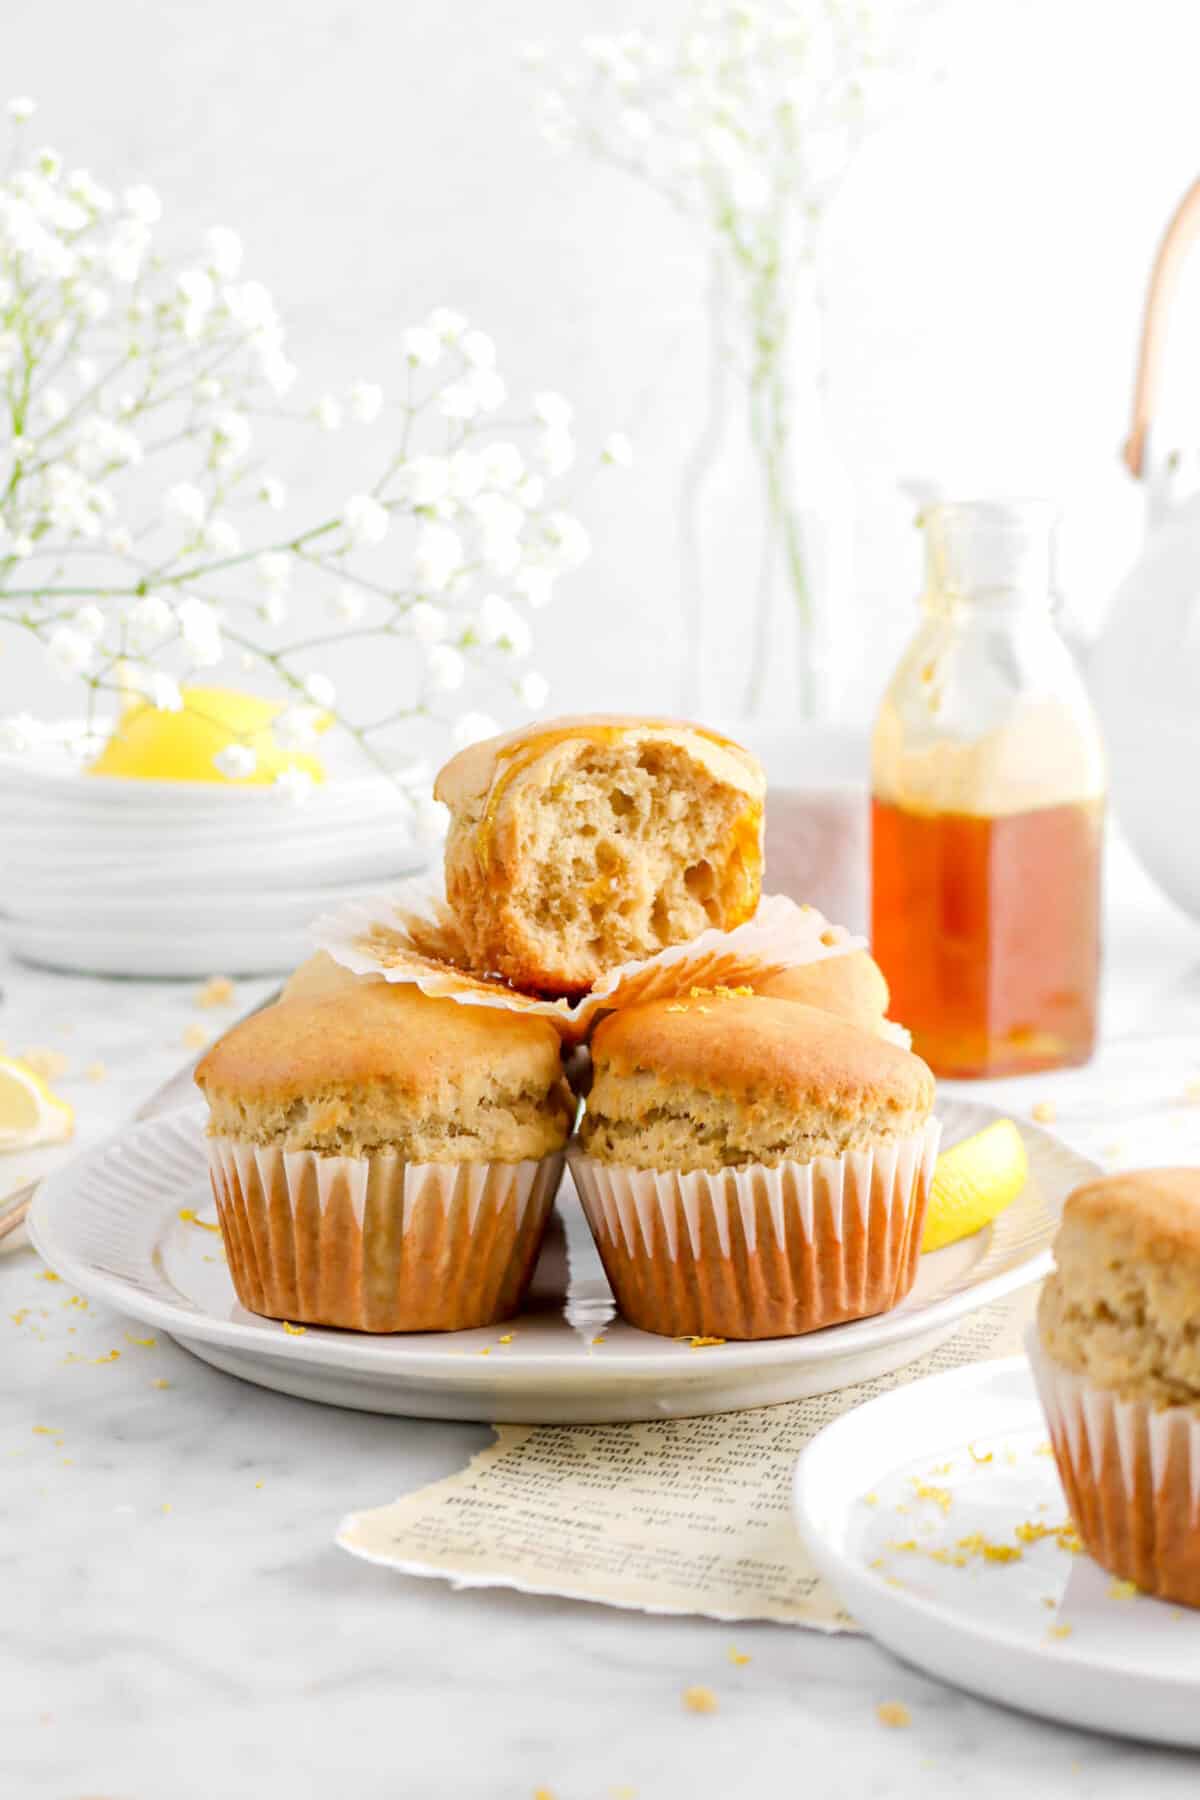 earl grey honey lemon muffins stacked white plate with glass of honey behind, a tea pot, a stack of white plates, and flowers in vases